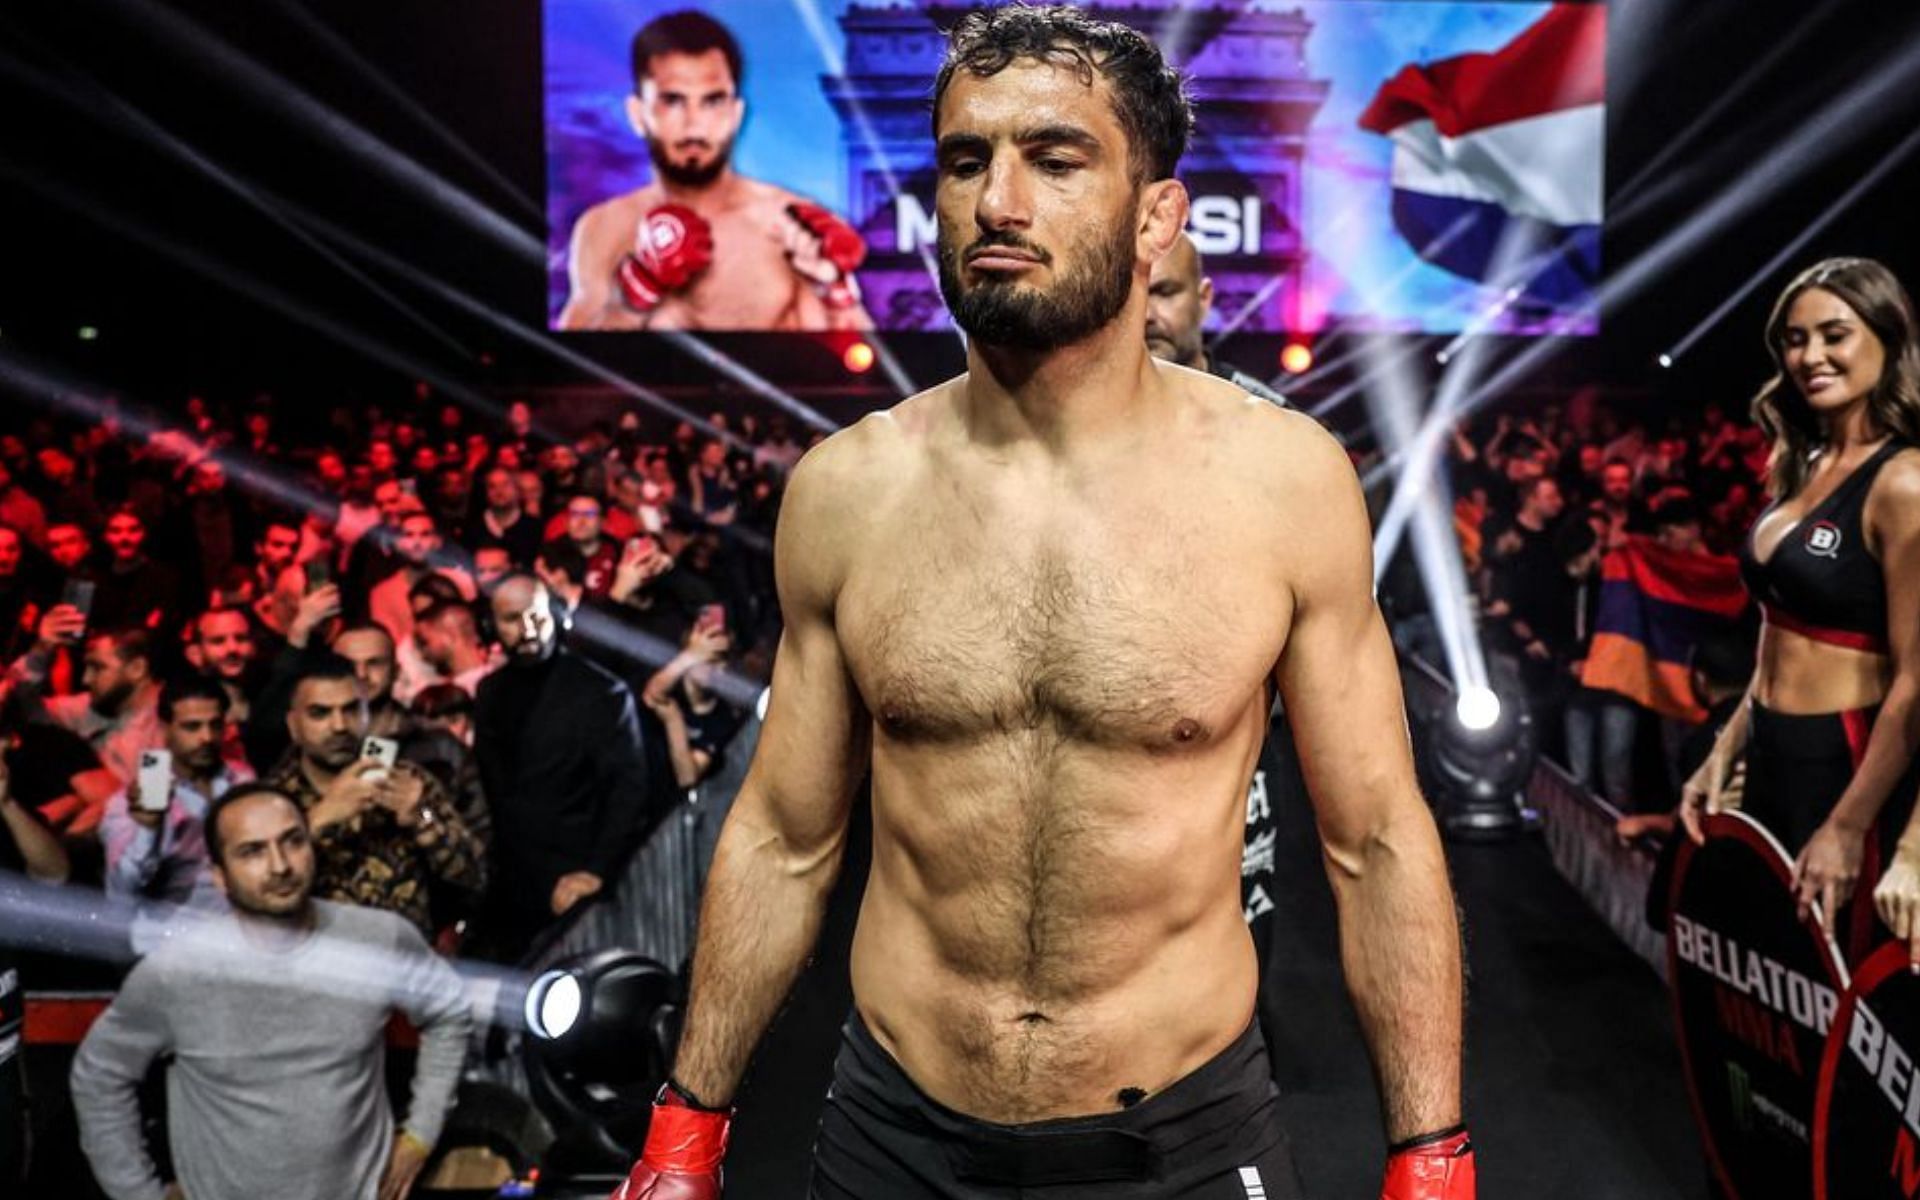 Gegard Mousasi calls out PFL for refusing to honor existing contract after merger with Bellator [Image courtesy: Bellator MMA/Lucas Noonan]